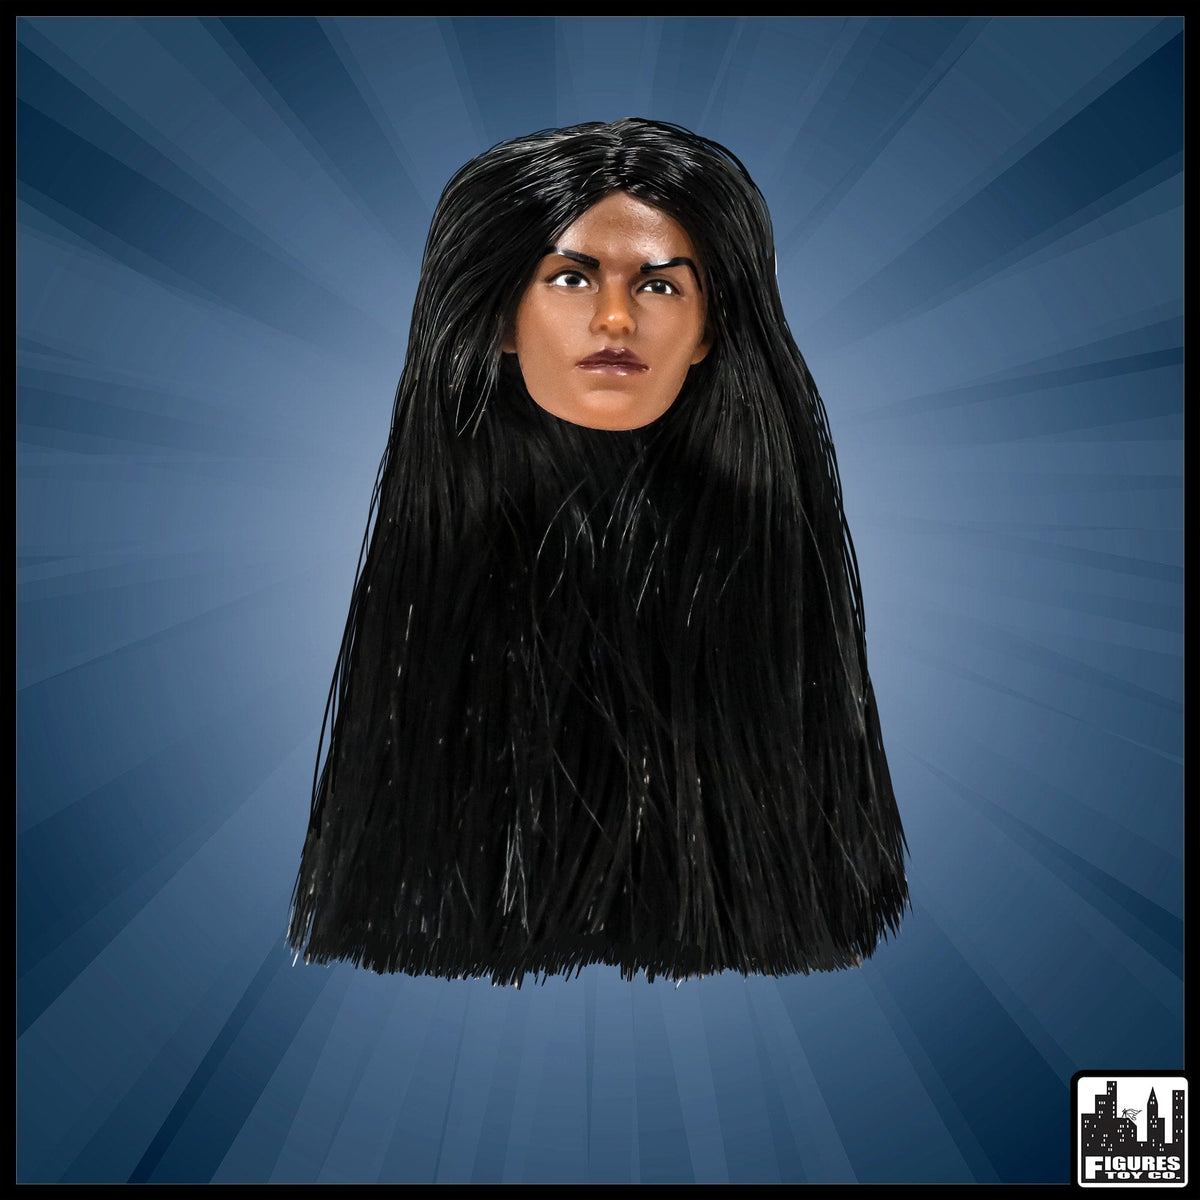 African American FEMALE Interchangeable Wrestling Action Figure Head With Long Black Hair